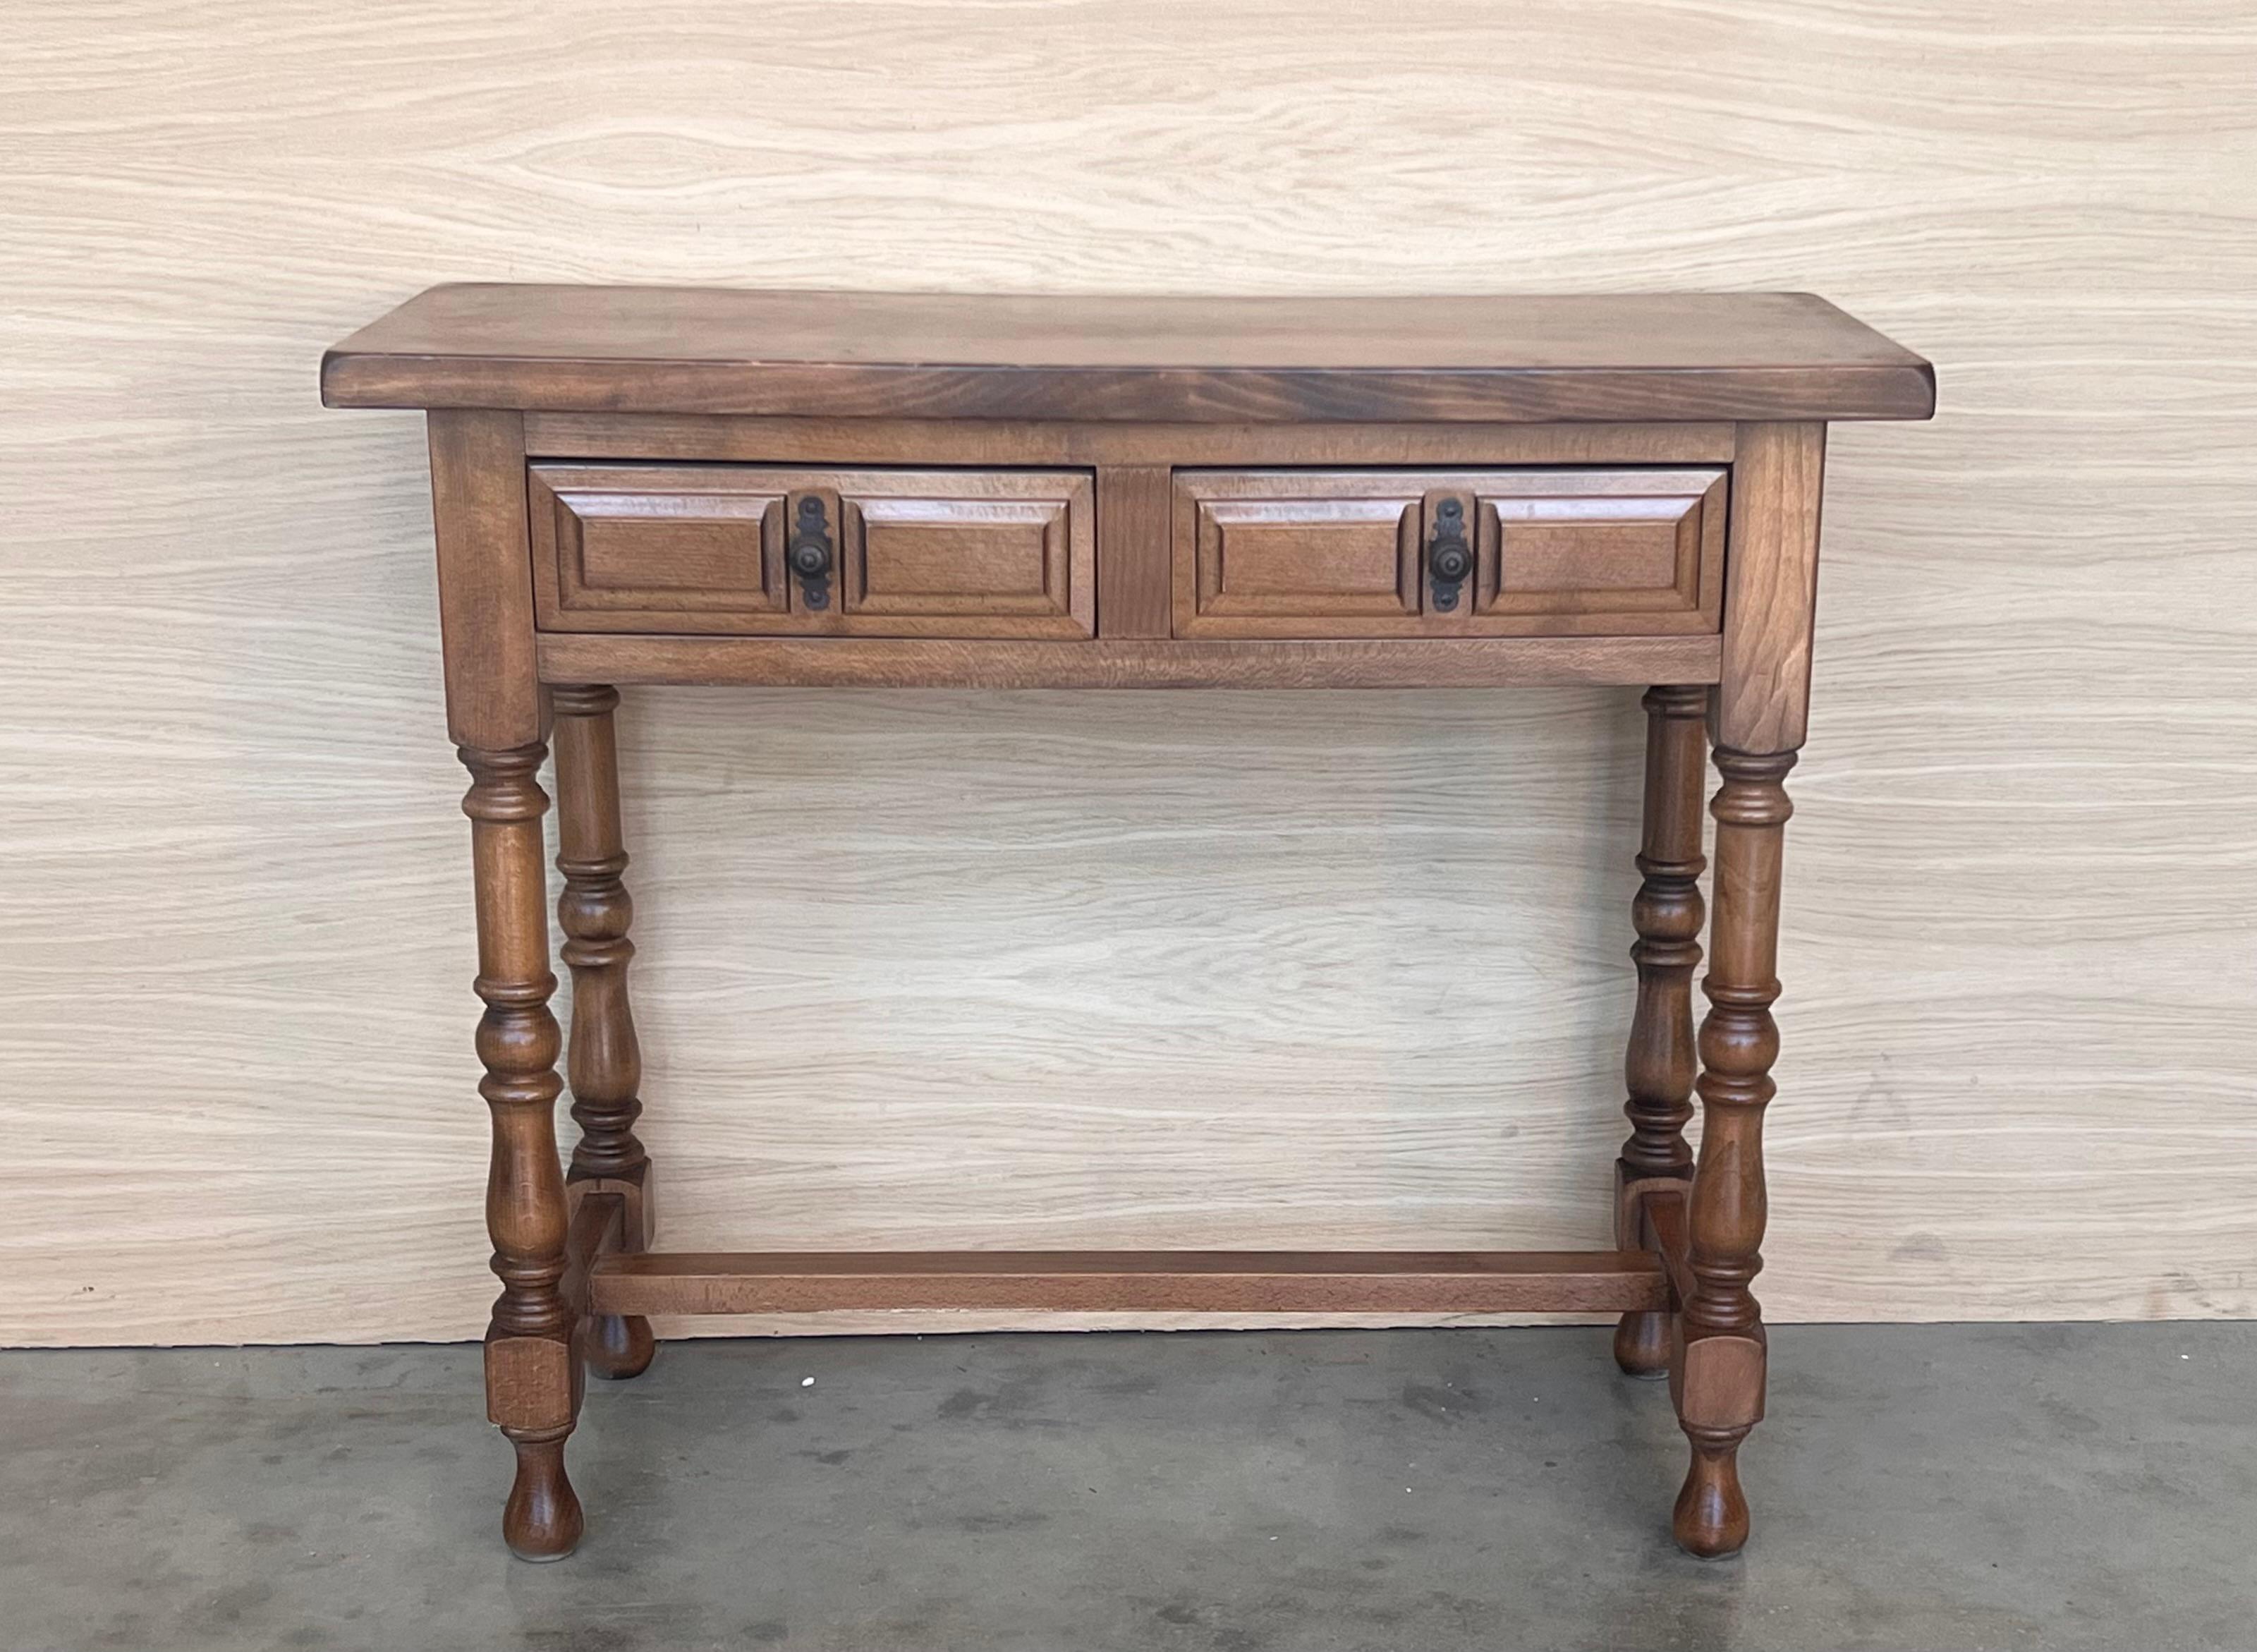 Early 20th century carved Spanish console with two drawers.
This table with character is of rare narrow depth. It is characteristic of Spanish Baroque furniture with a thick one-piece top, a simple and bold carved drawers and turnings legs. It has a